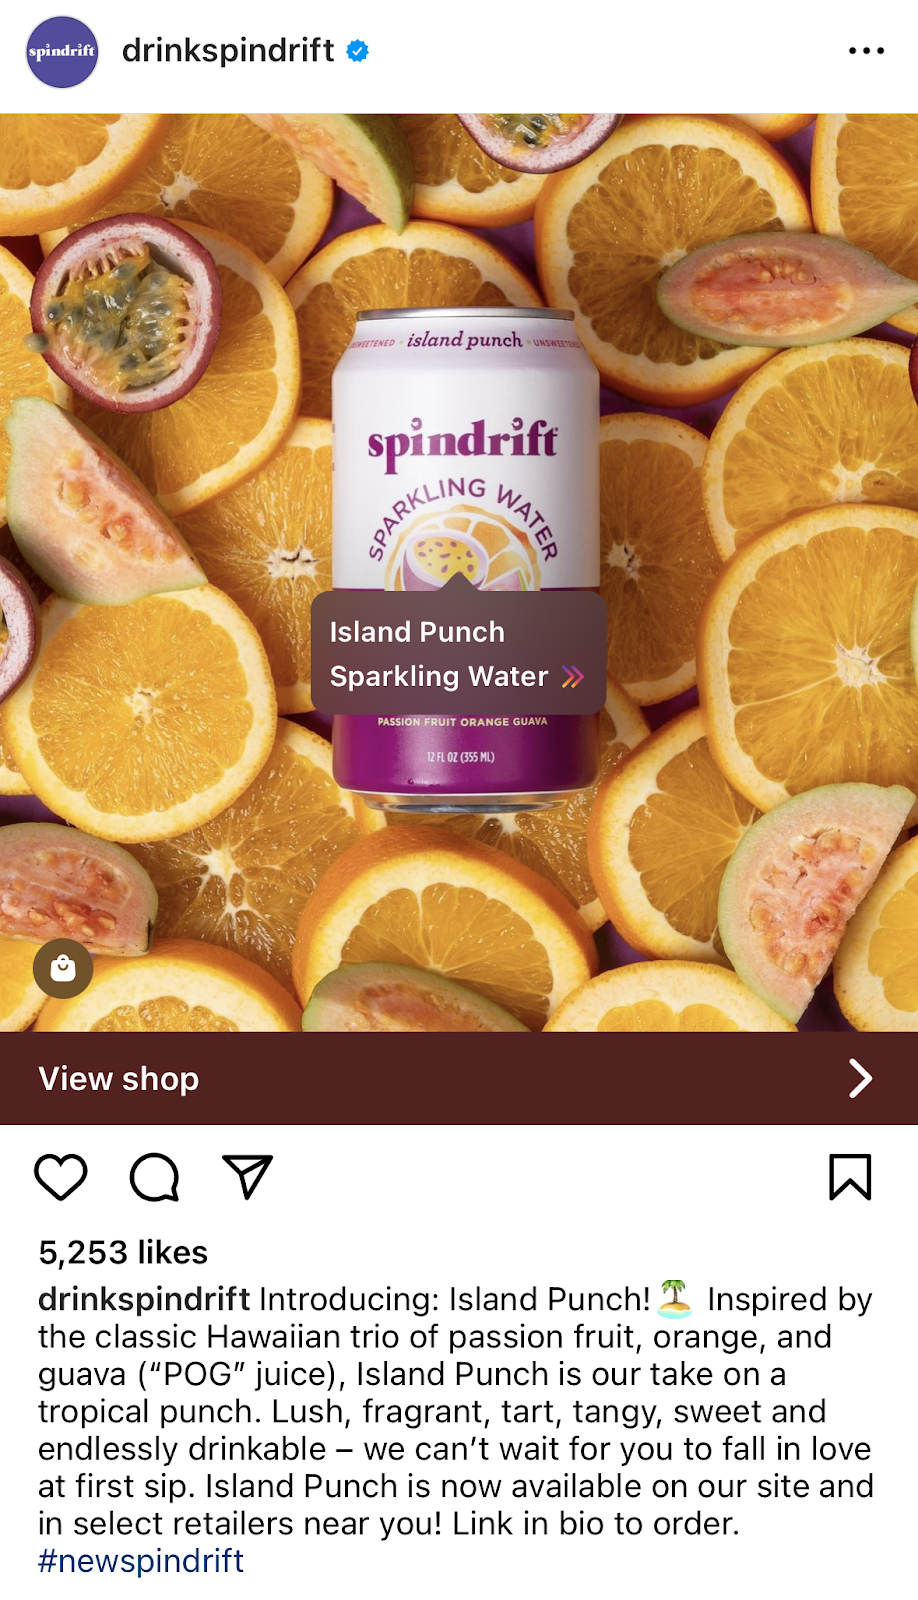 instagram post of drinks brand with view shop banner below the product image